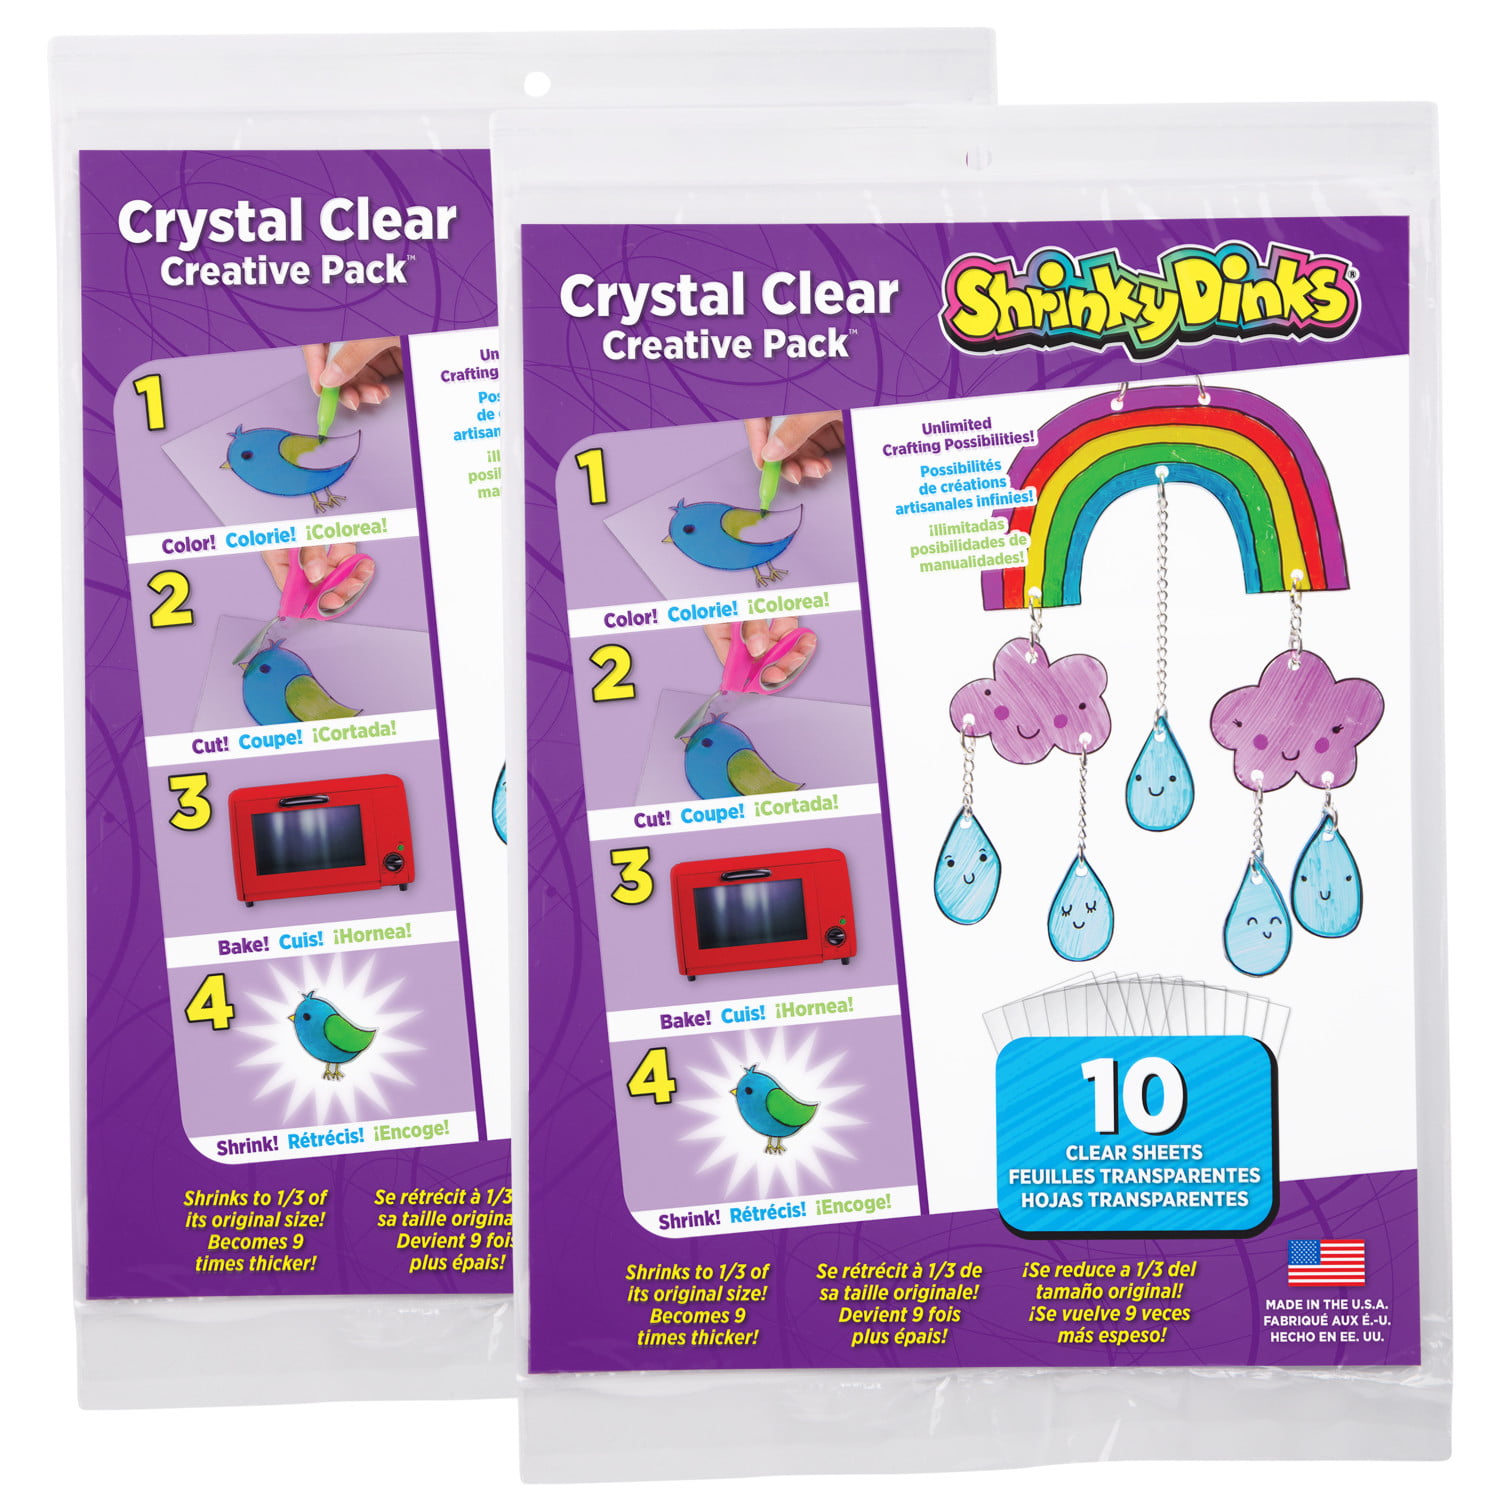 Shrinky-Dinks! Tutorial video and supplies!